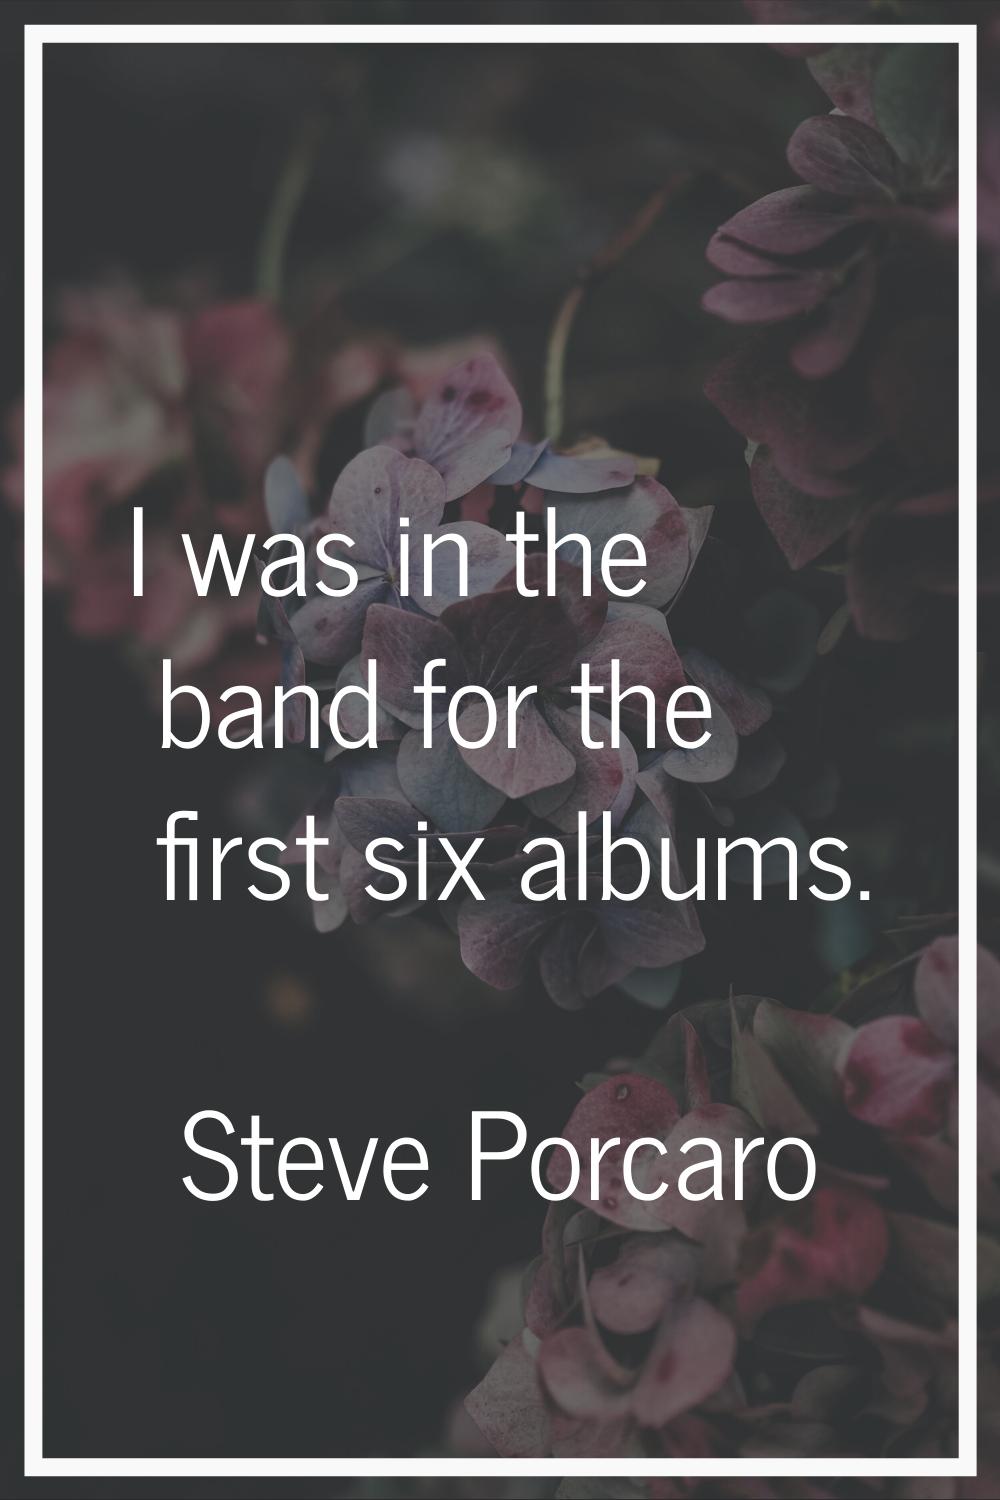 I was in the band for the first six albums.